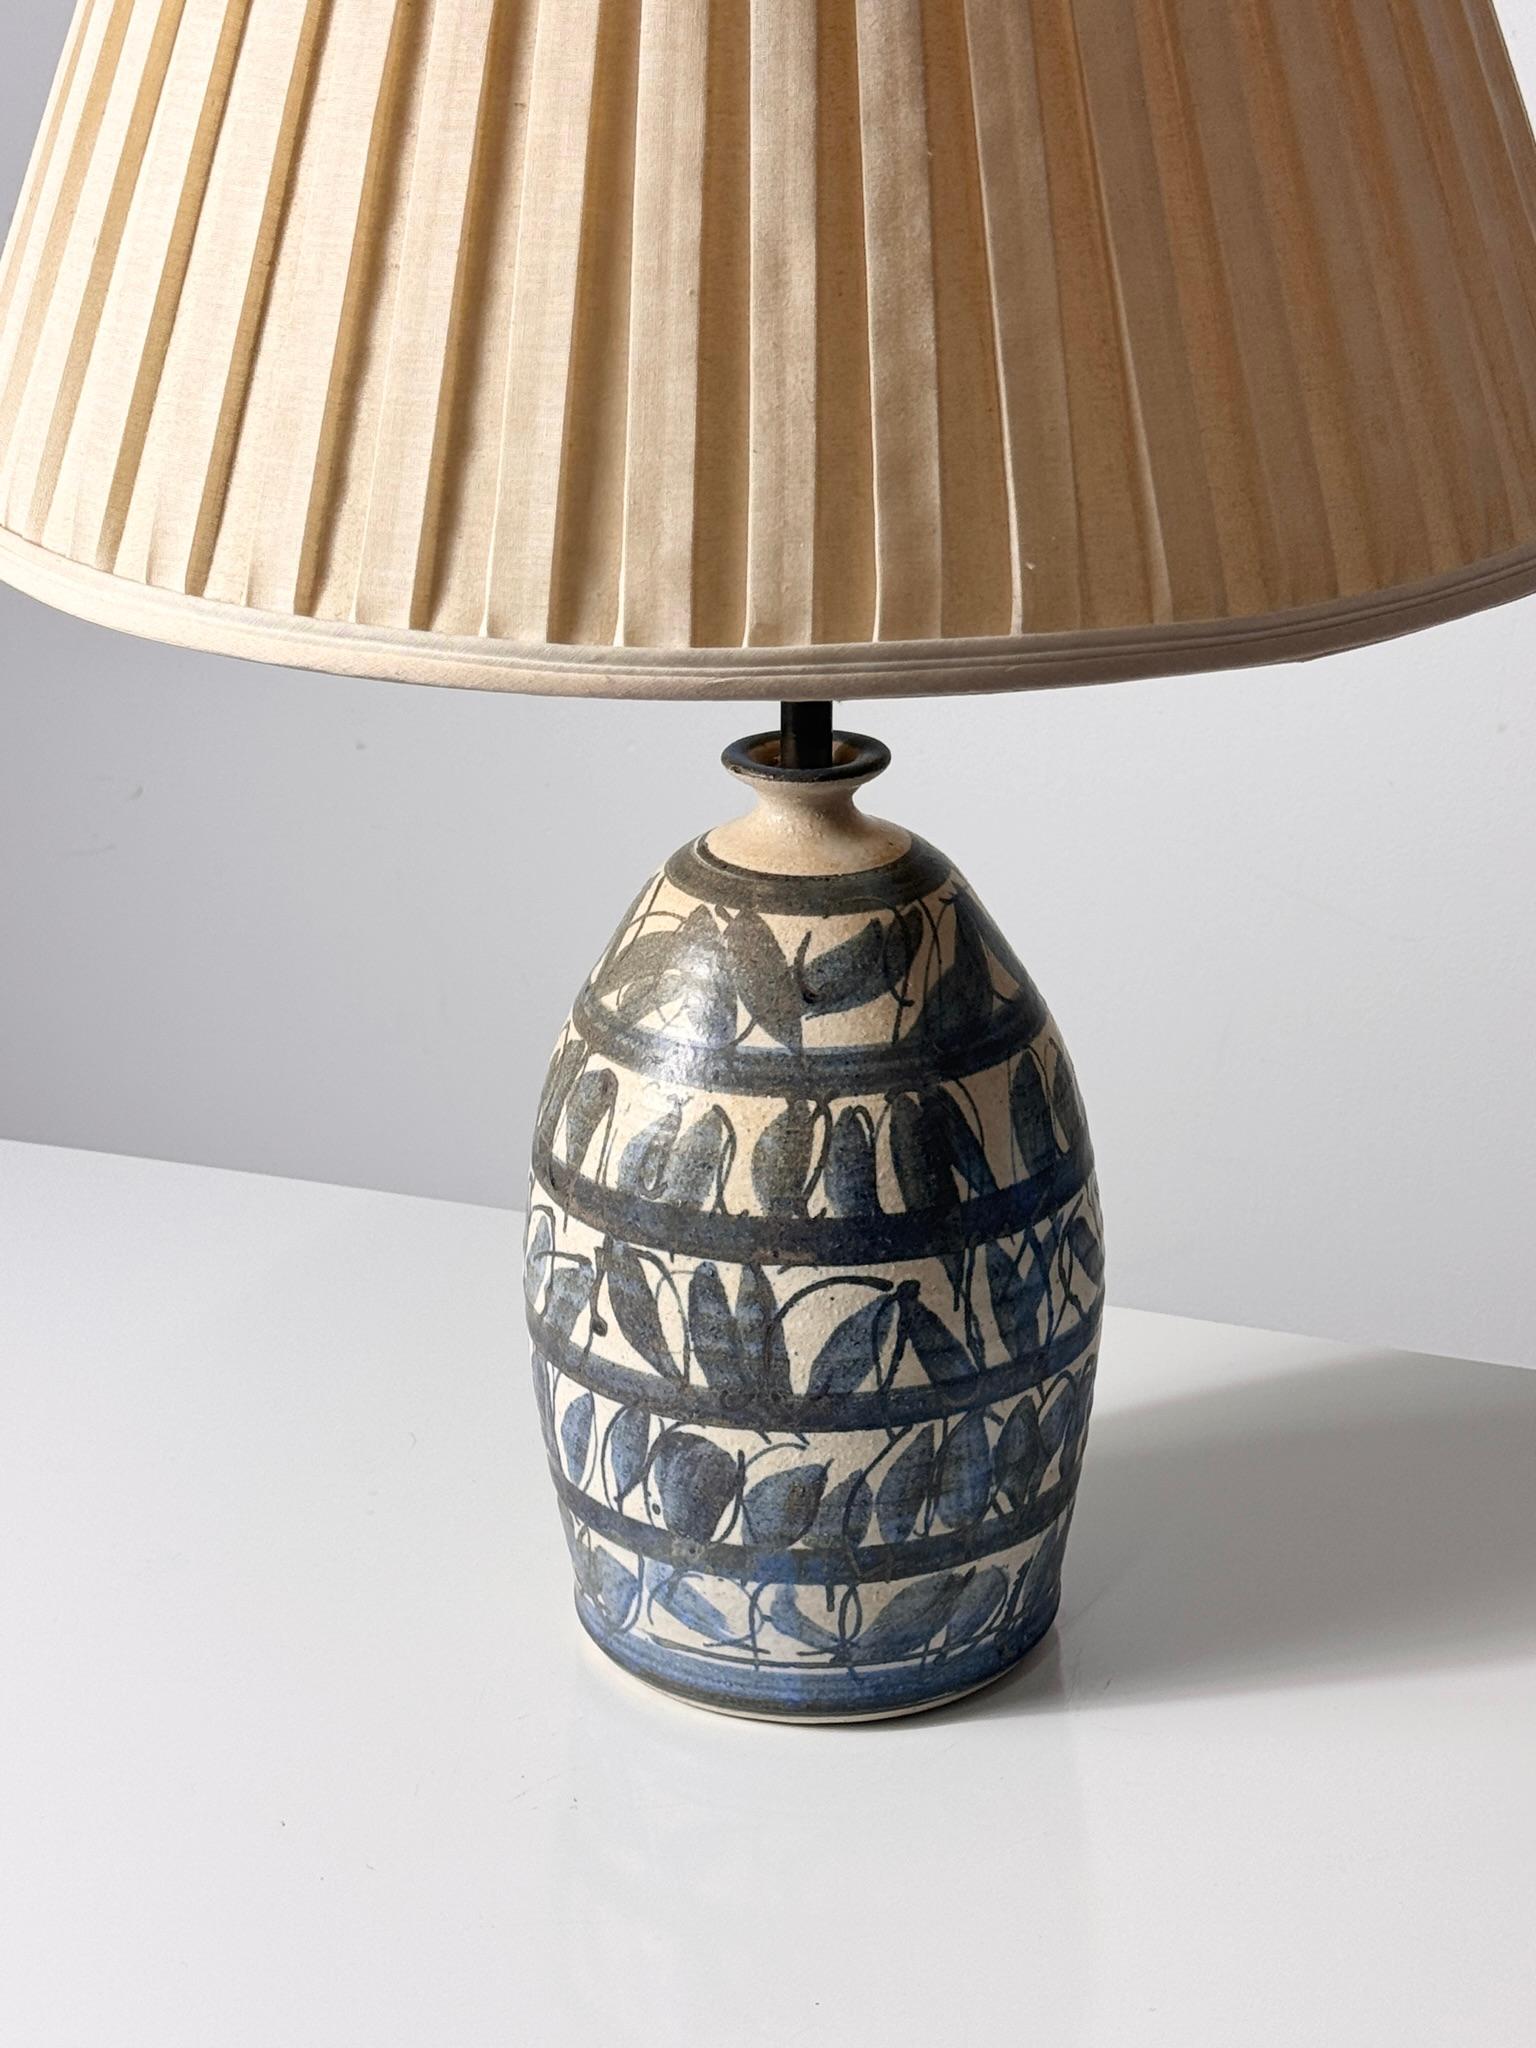 A rare table lamp by JT Abernathy of Ann Arbor MI circa 1960s
Dark blue patterned glaze with original shade

27 inch overall height
19 inch shade diameter
7 inch base diameter
12 inch base height